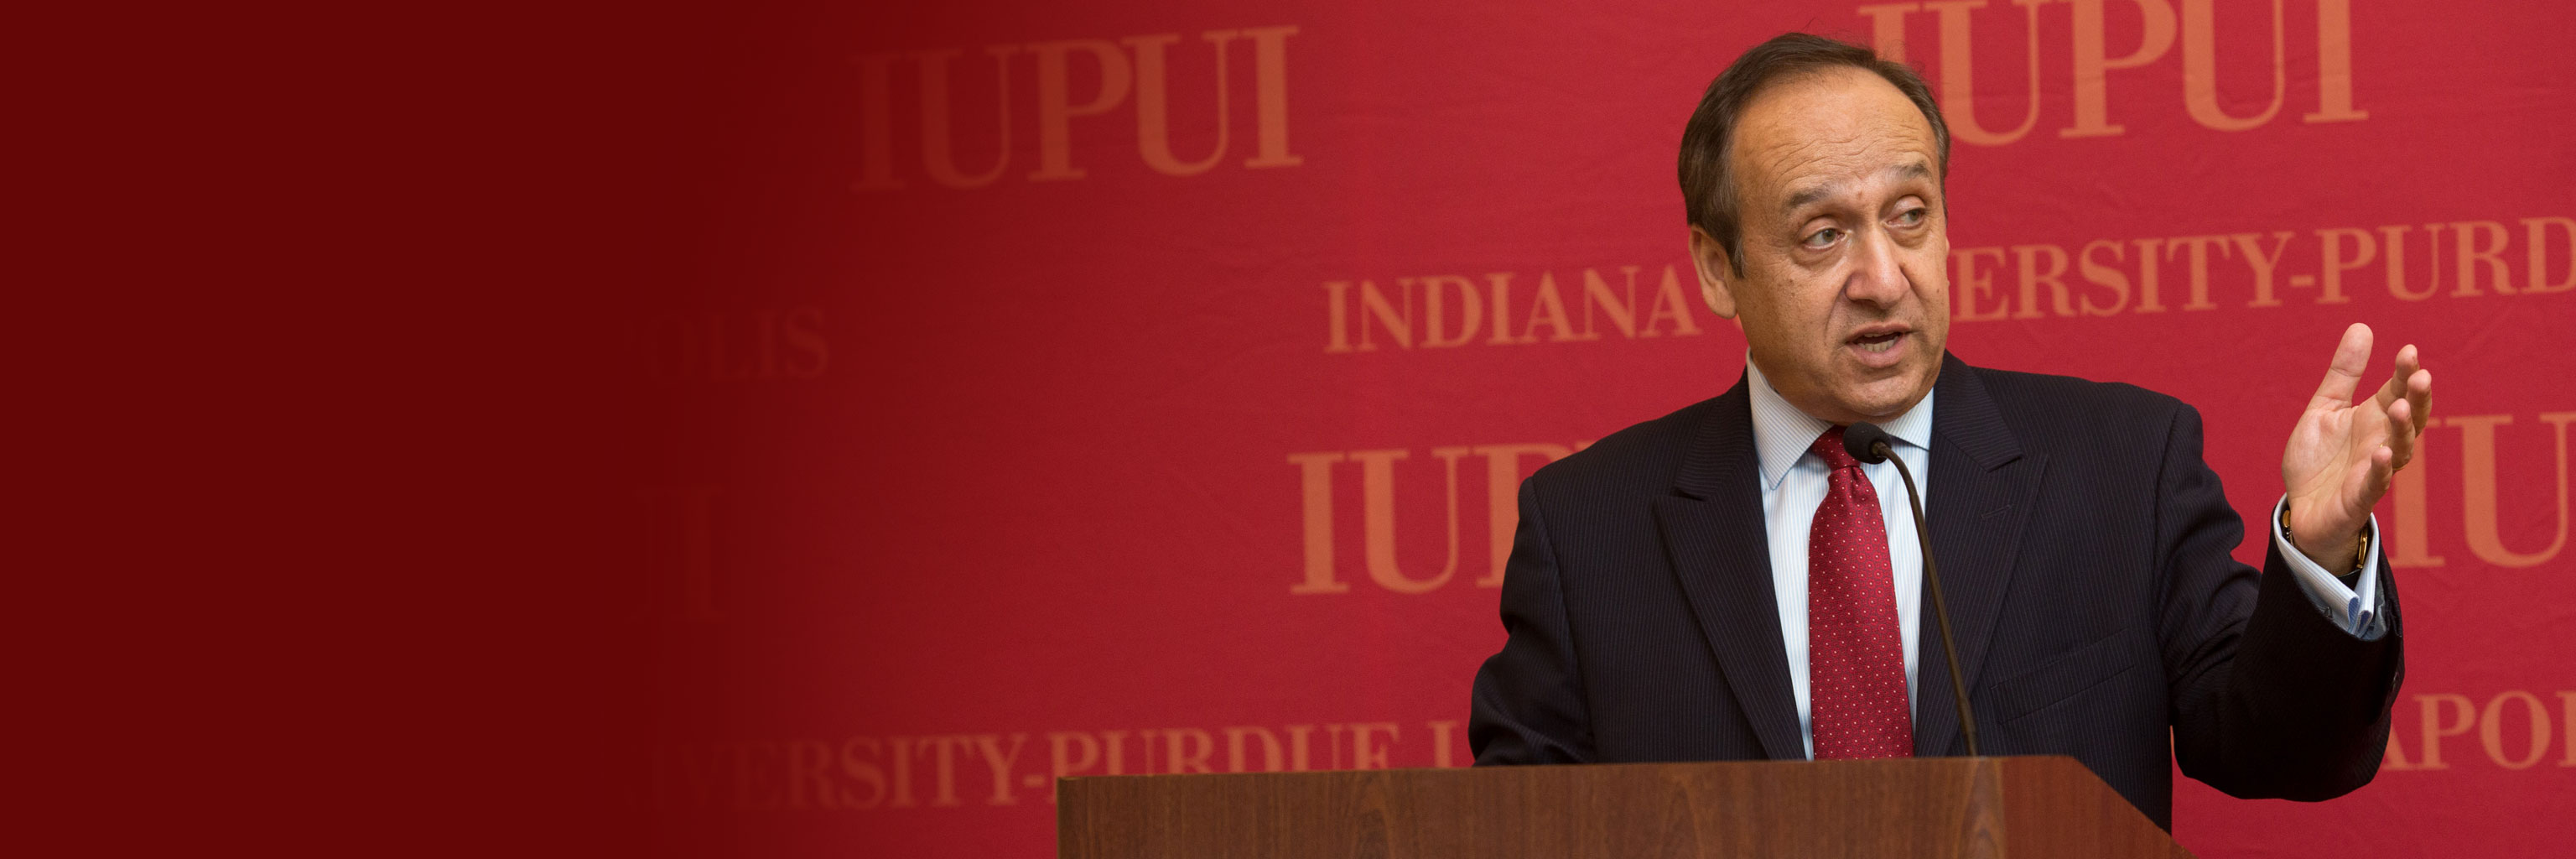 IUPUI Chancellor Nasser Paydar delivers a speech while standing at a podium.  